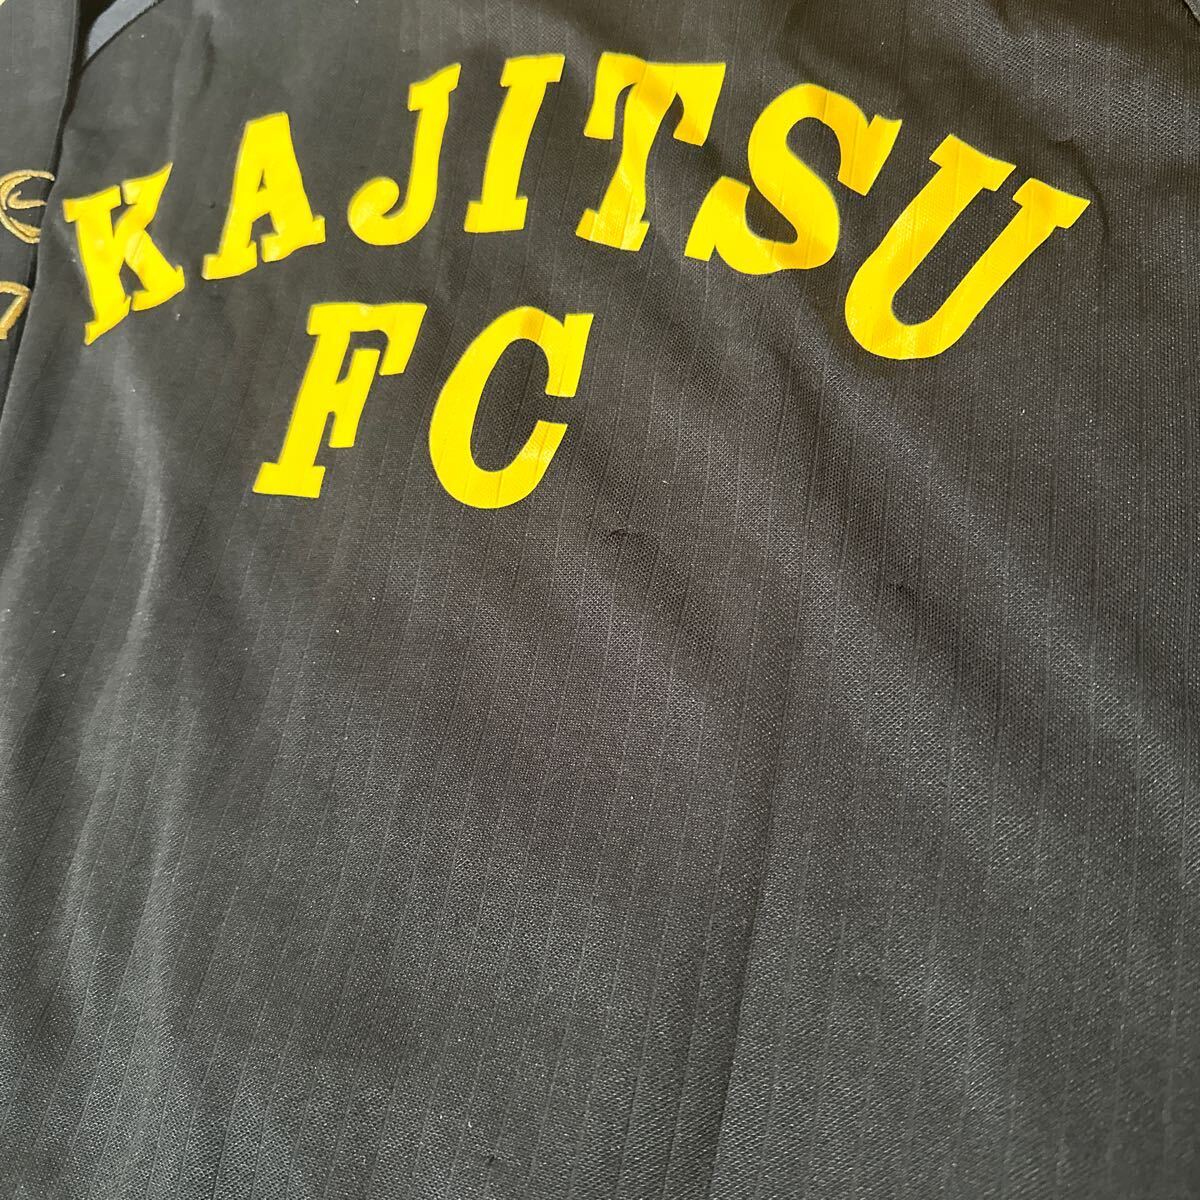  Kagoshima real industry high school supplied goods 3 point set jersey main . actual use not for sale uniform Shimizu es Pal s pine . large . Kyoto sun gaJ Lee g top and bottom set 